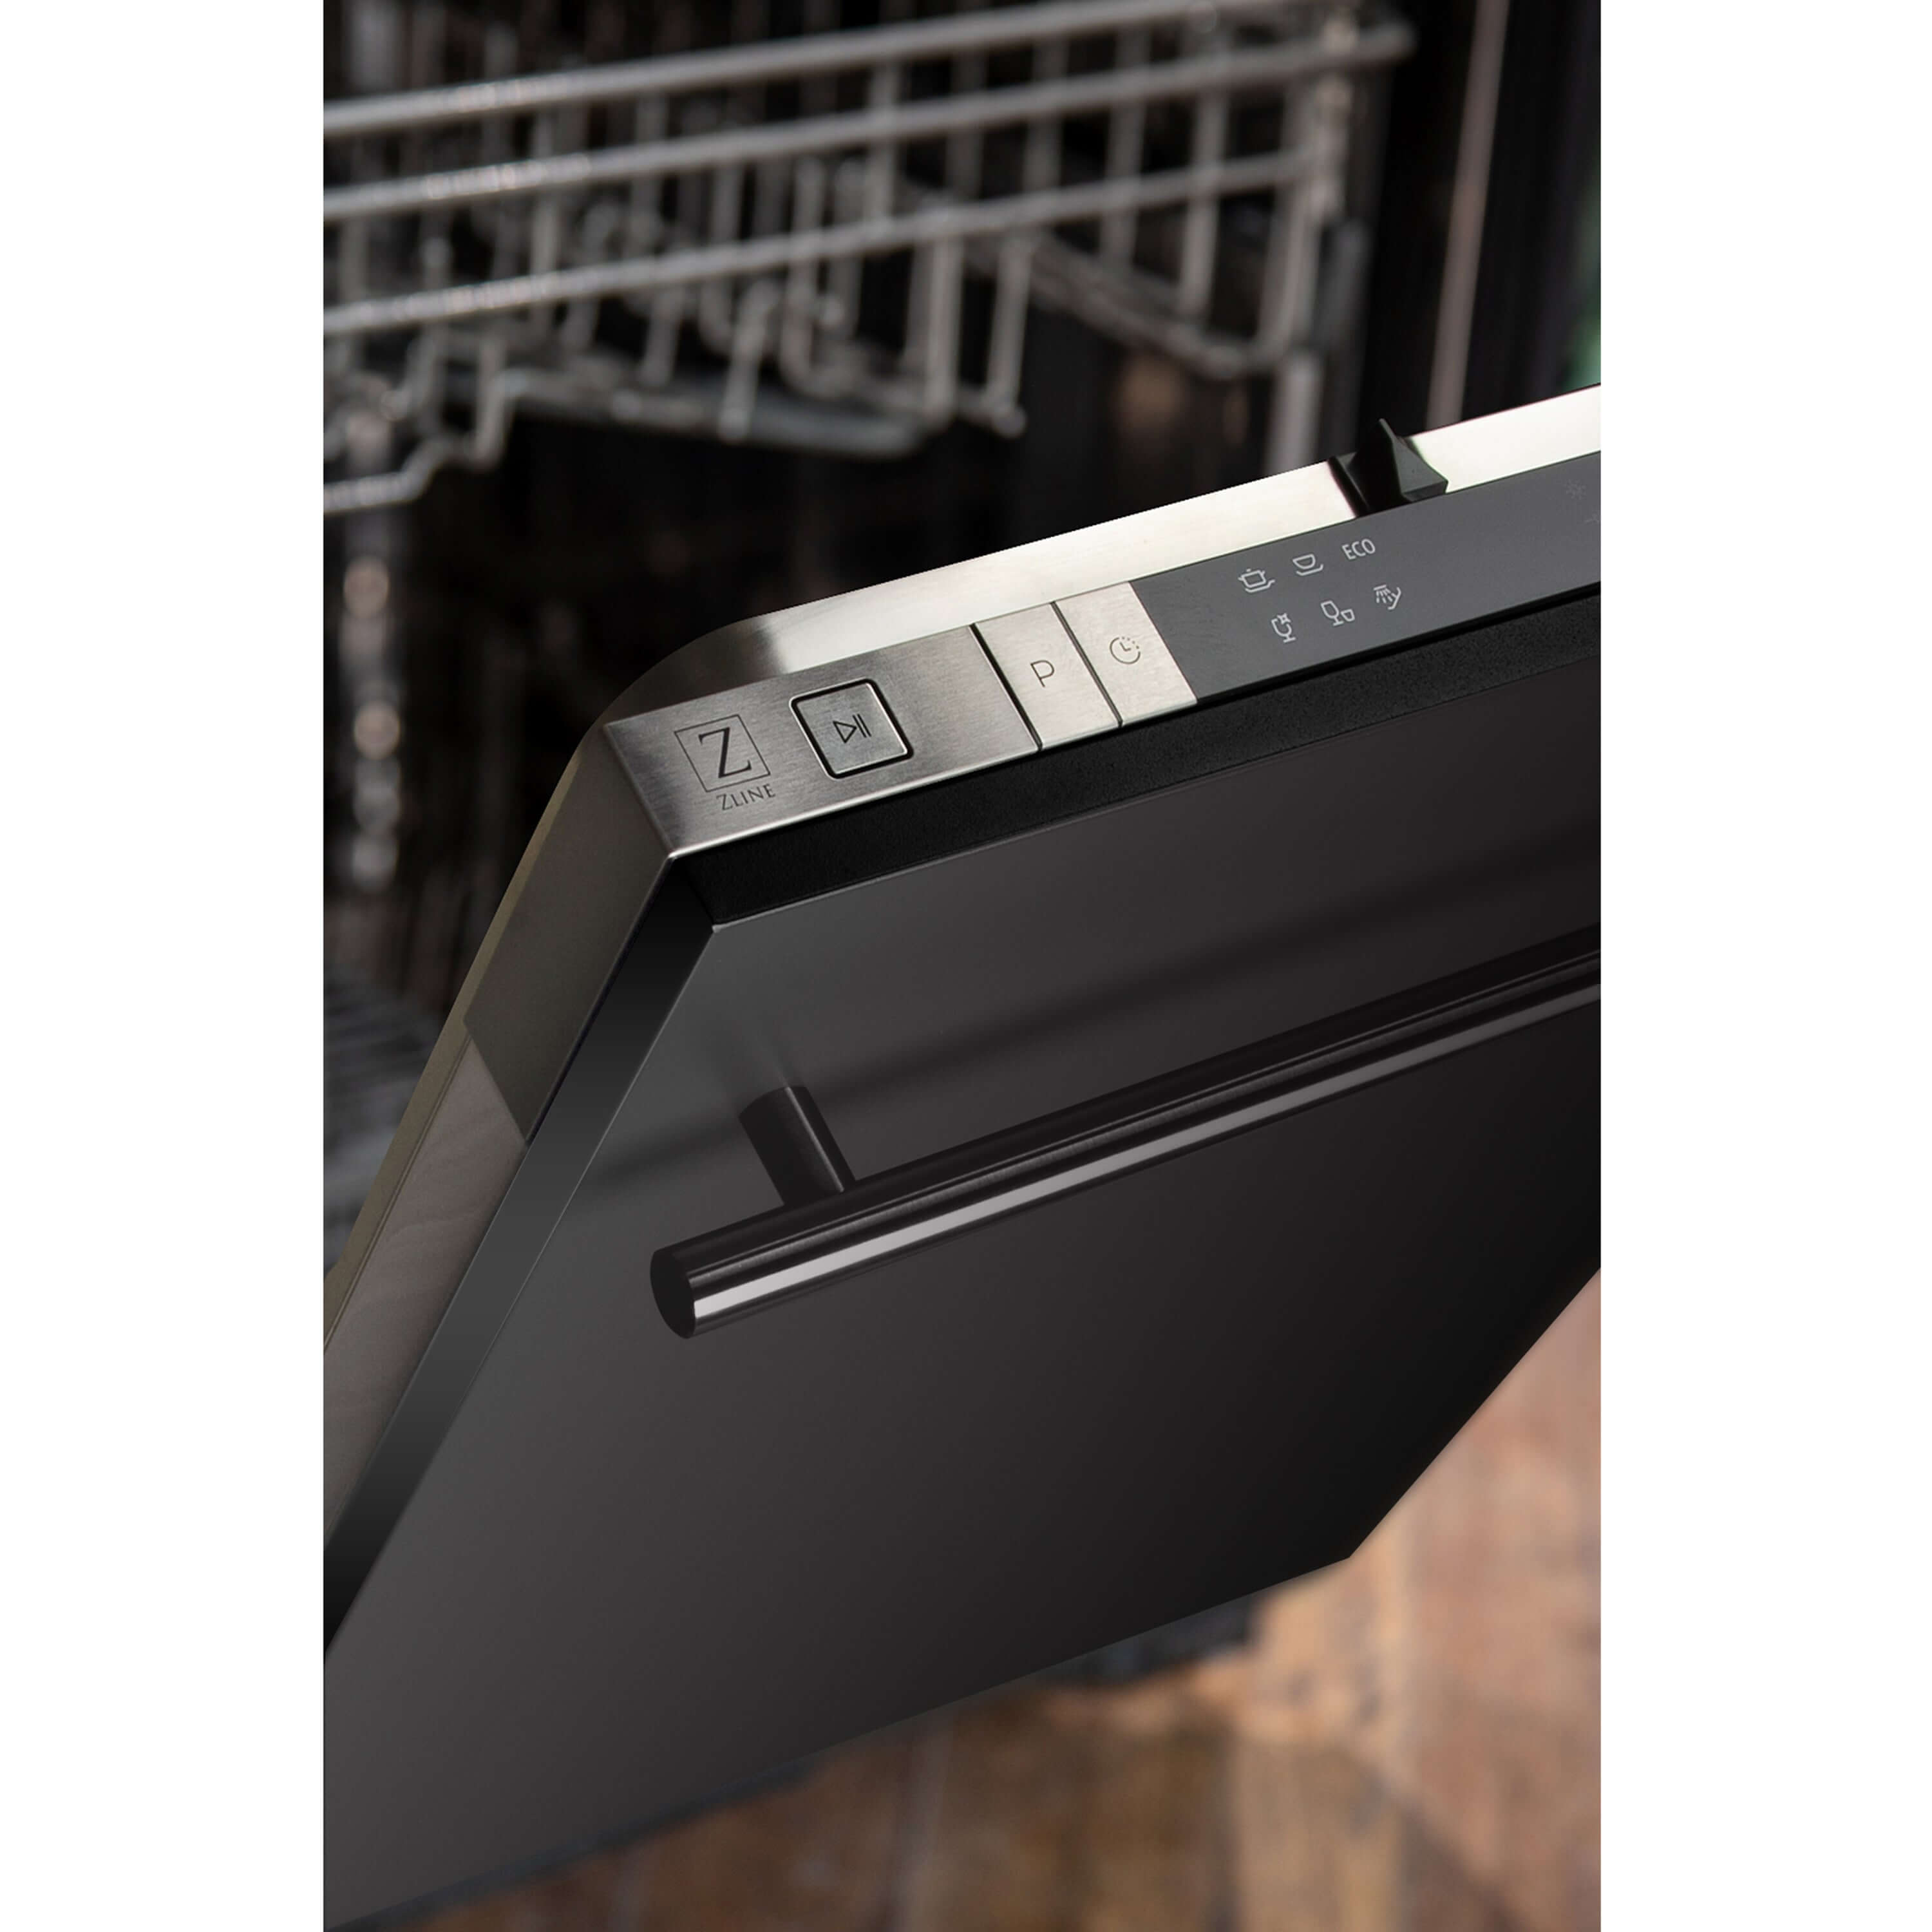 ZLINE 18 in. Compact Black Stainless Steel Top Control Built-In Dishwasher with Stainless Steel Tub and Modern Style Handle, 52dBa (DW-BS-H-18) built-in to cabinets in a luxury kitchen.